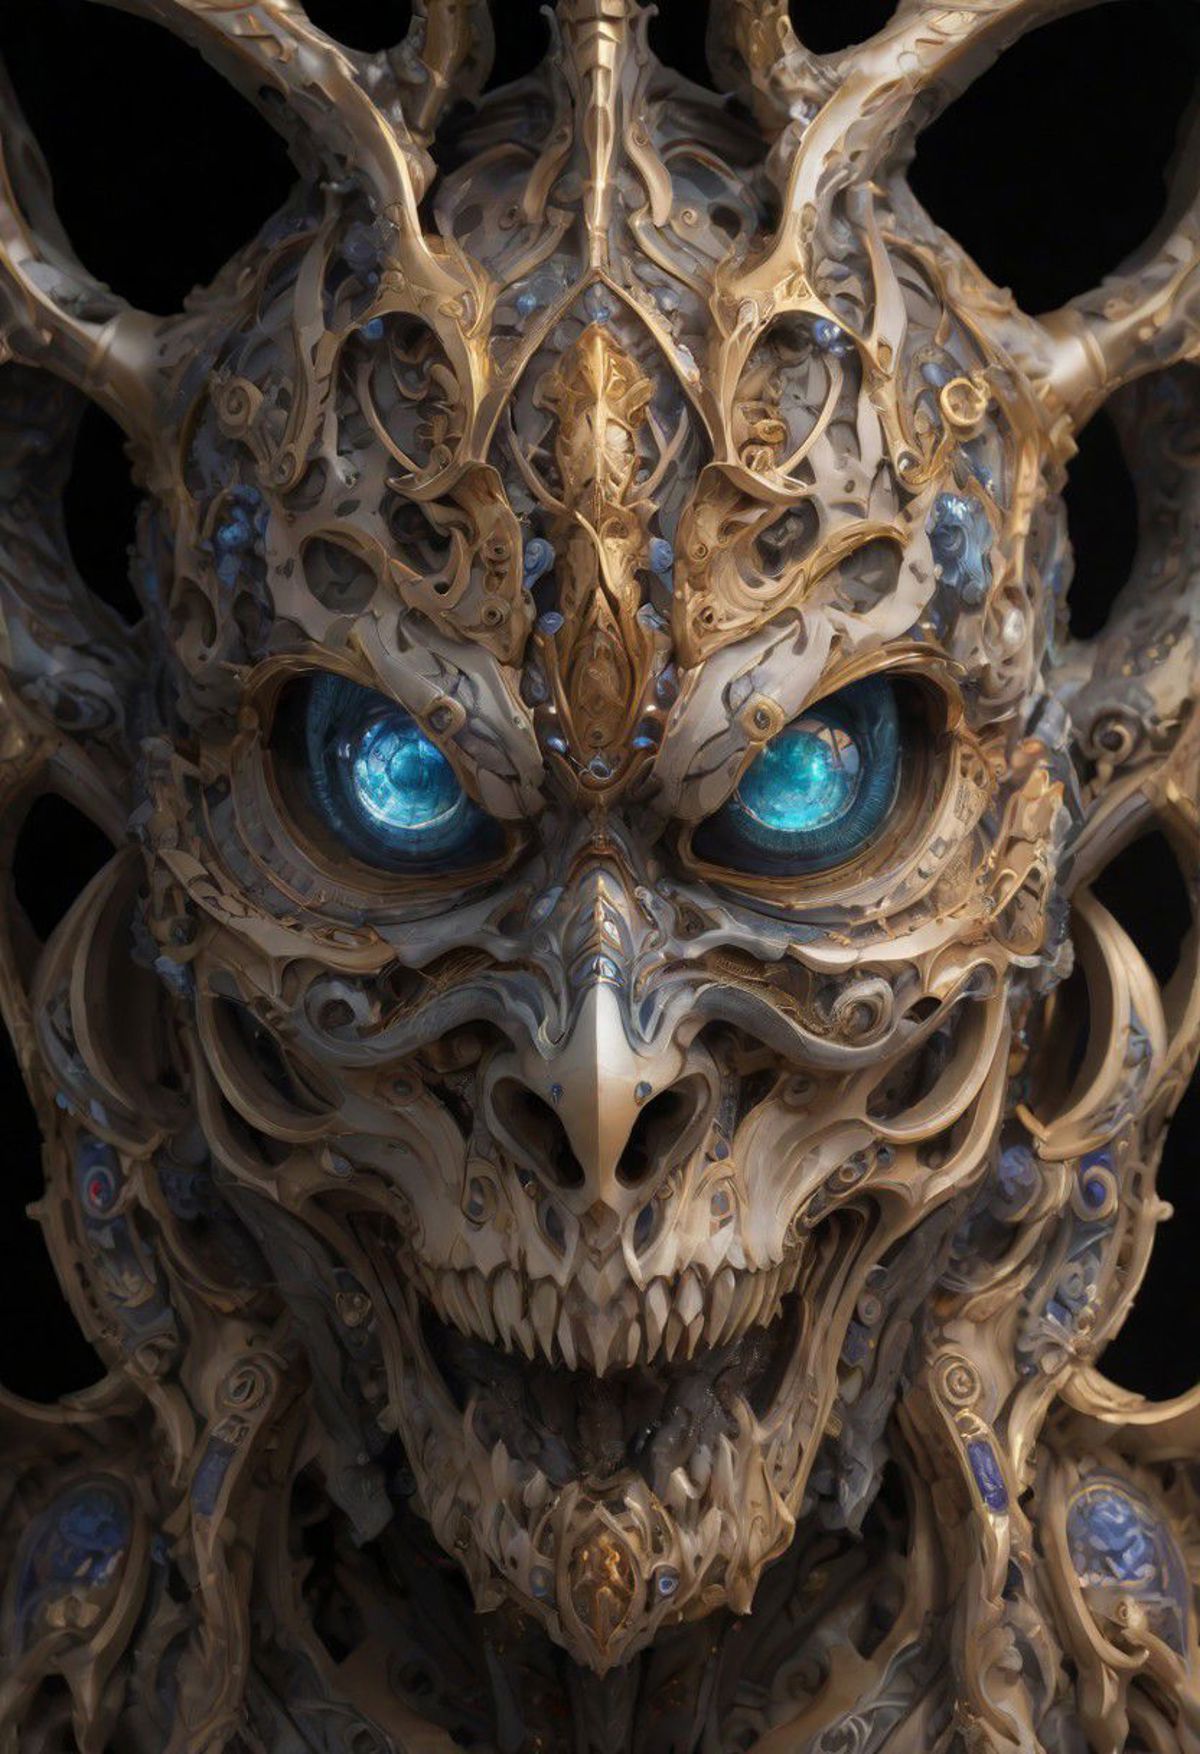 The face of a creepy robot or sculpture with blue eyes, gold accents, and a menacing grin.